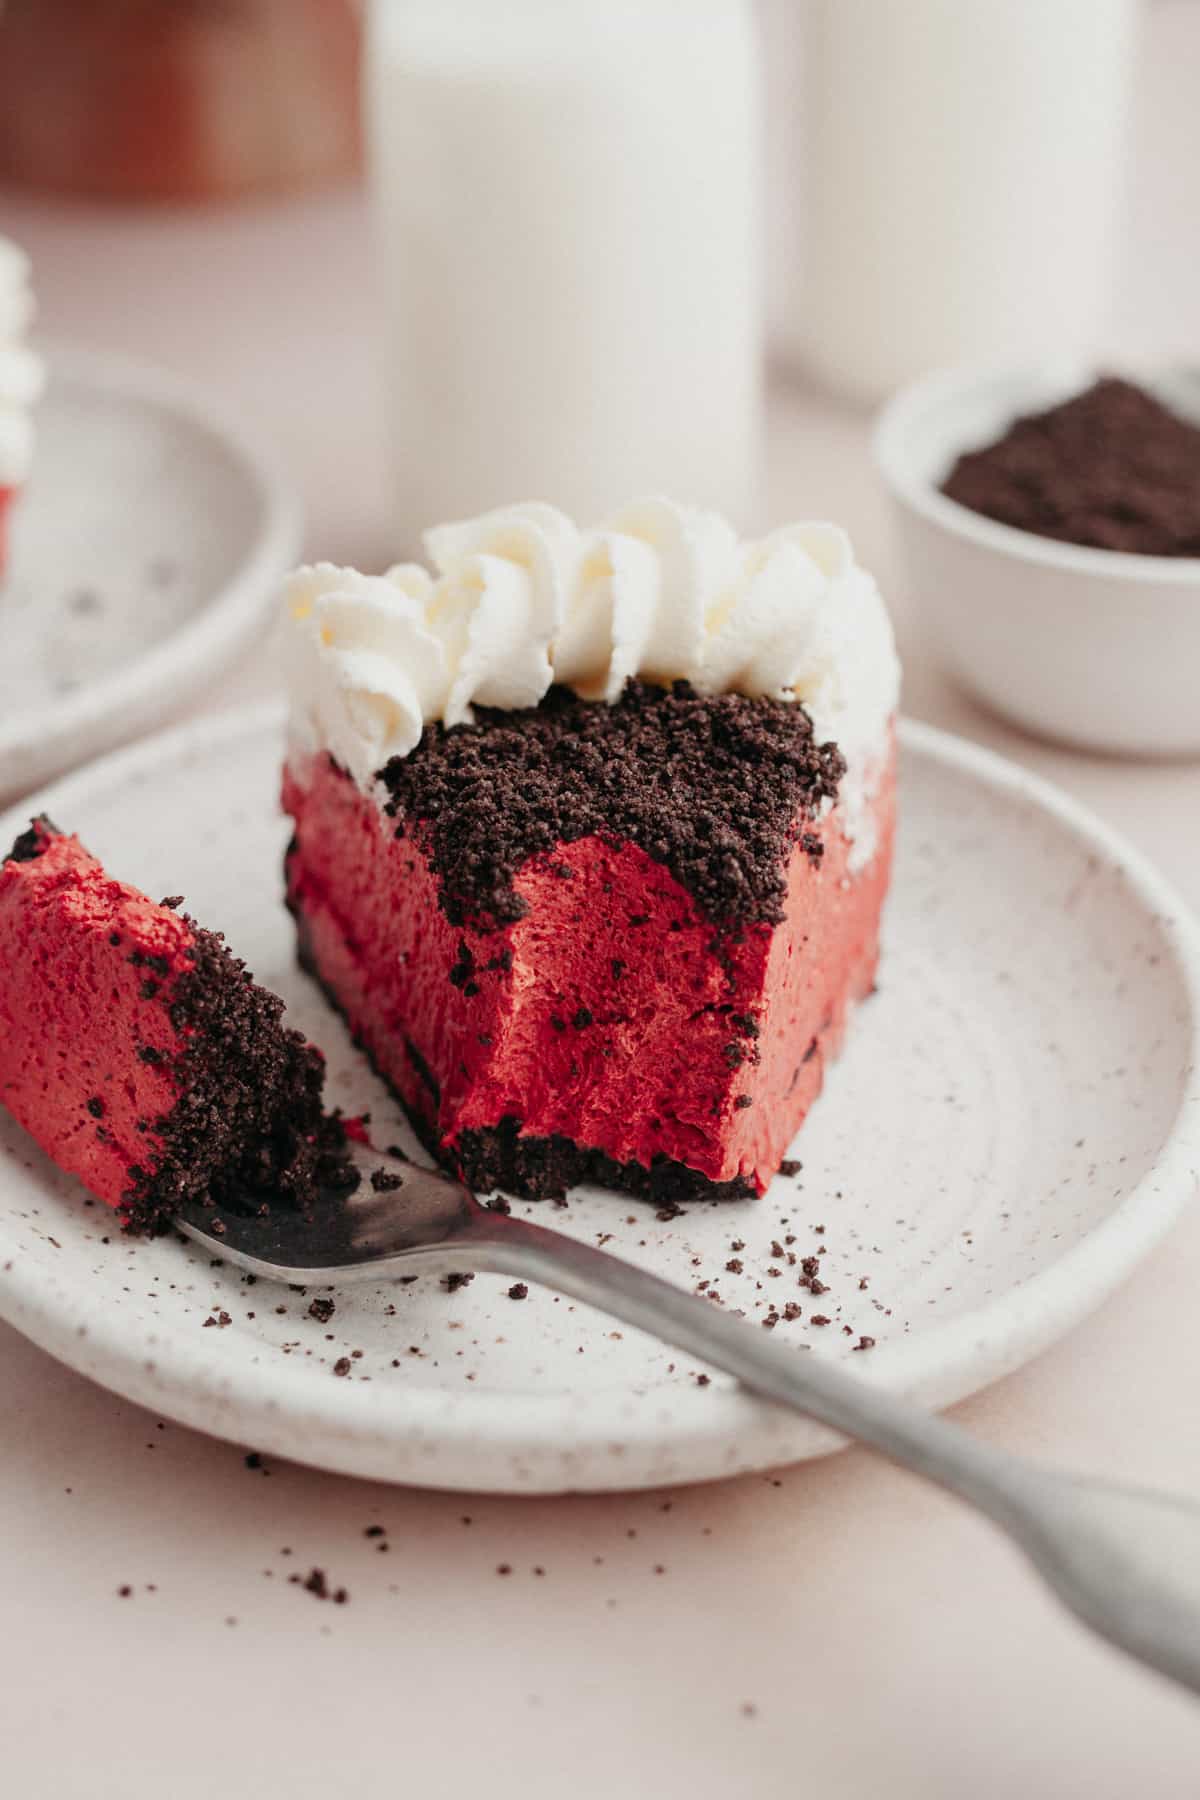 A slice of Oreo red velvet cheesecake on a small plate with a bite taken out of it.